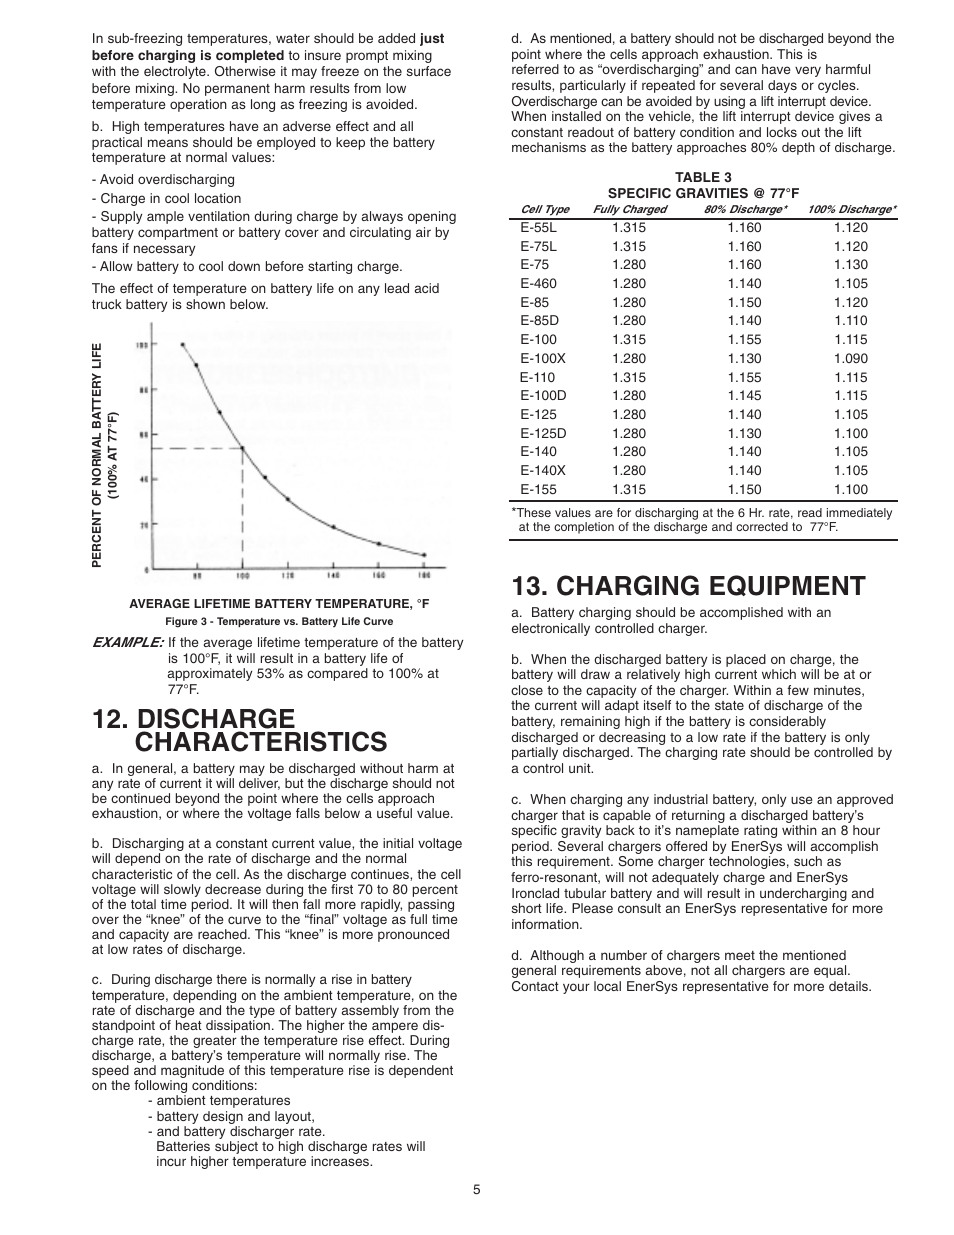 Discharge characteristics, Charging equipment | Ironclad Automobile Parts User Manual | Page 5 / 11